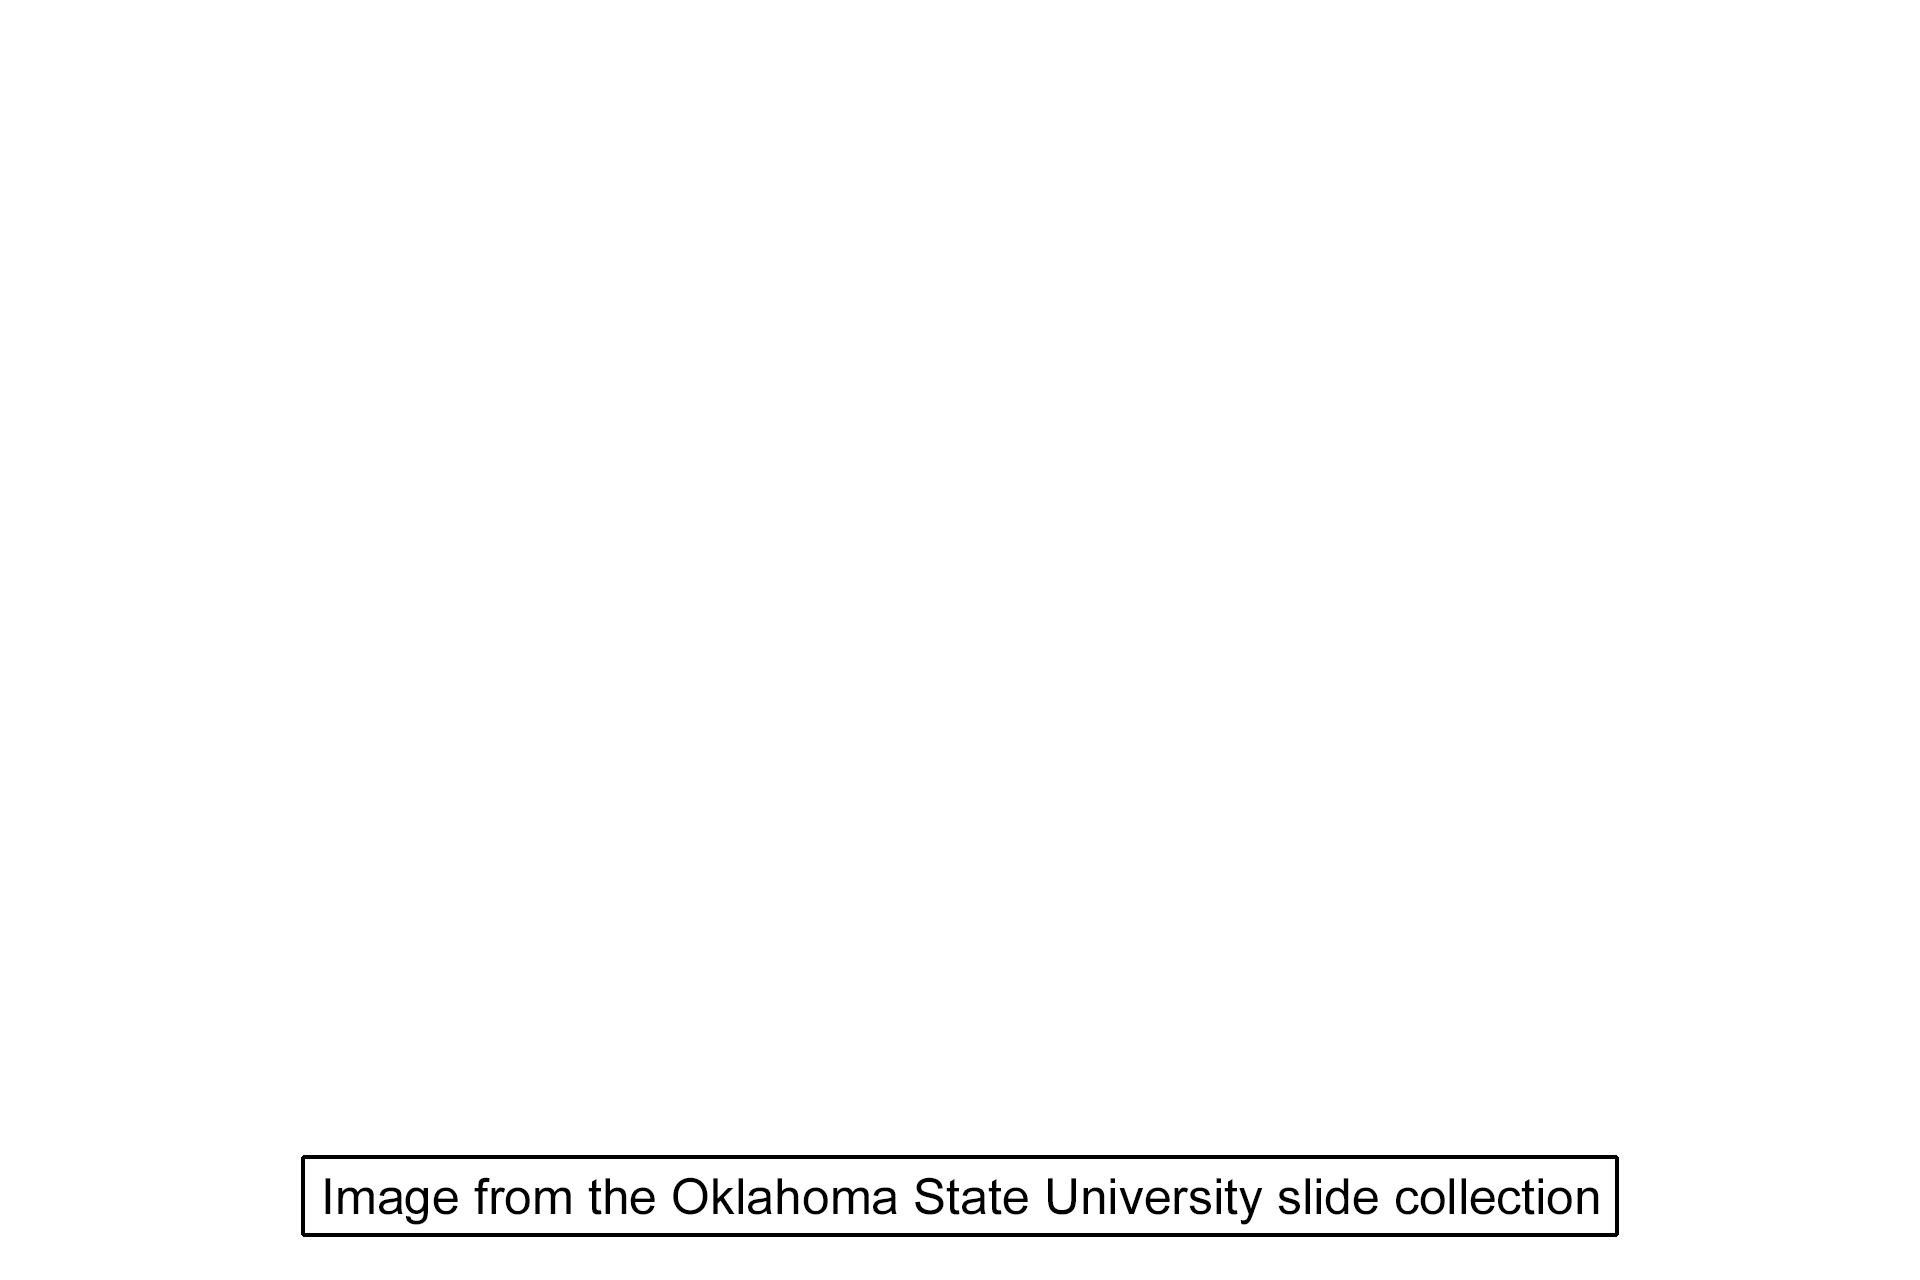 Image source > <p>Image taken of a slide in the Oklahoma State University collection.</p>
